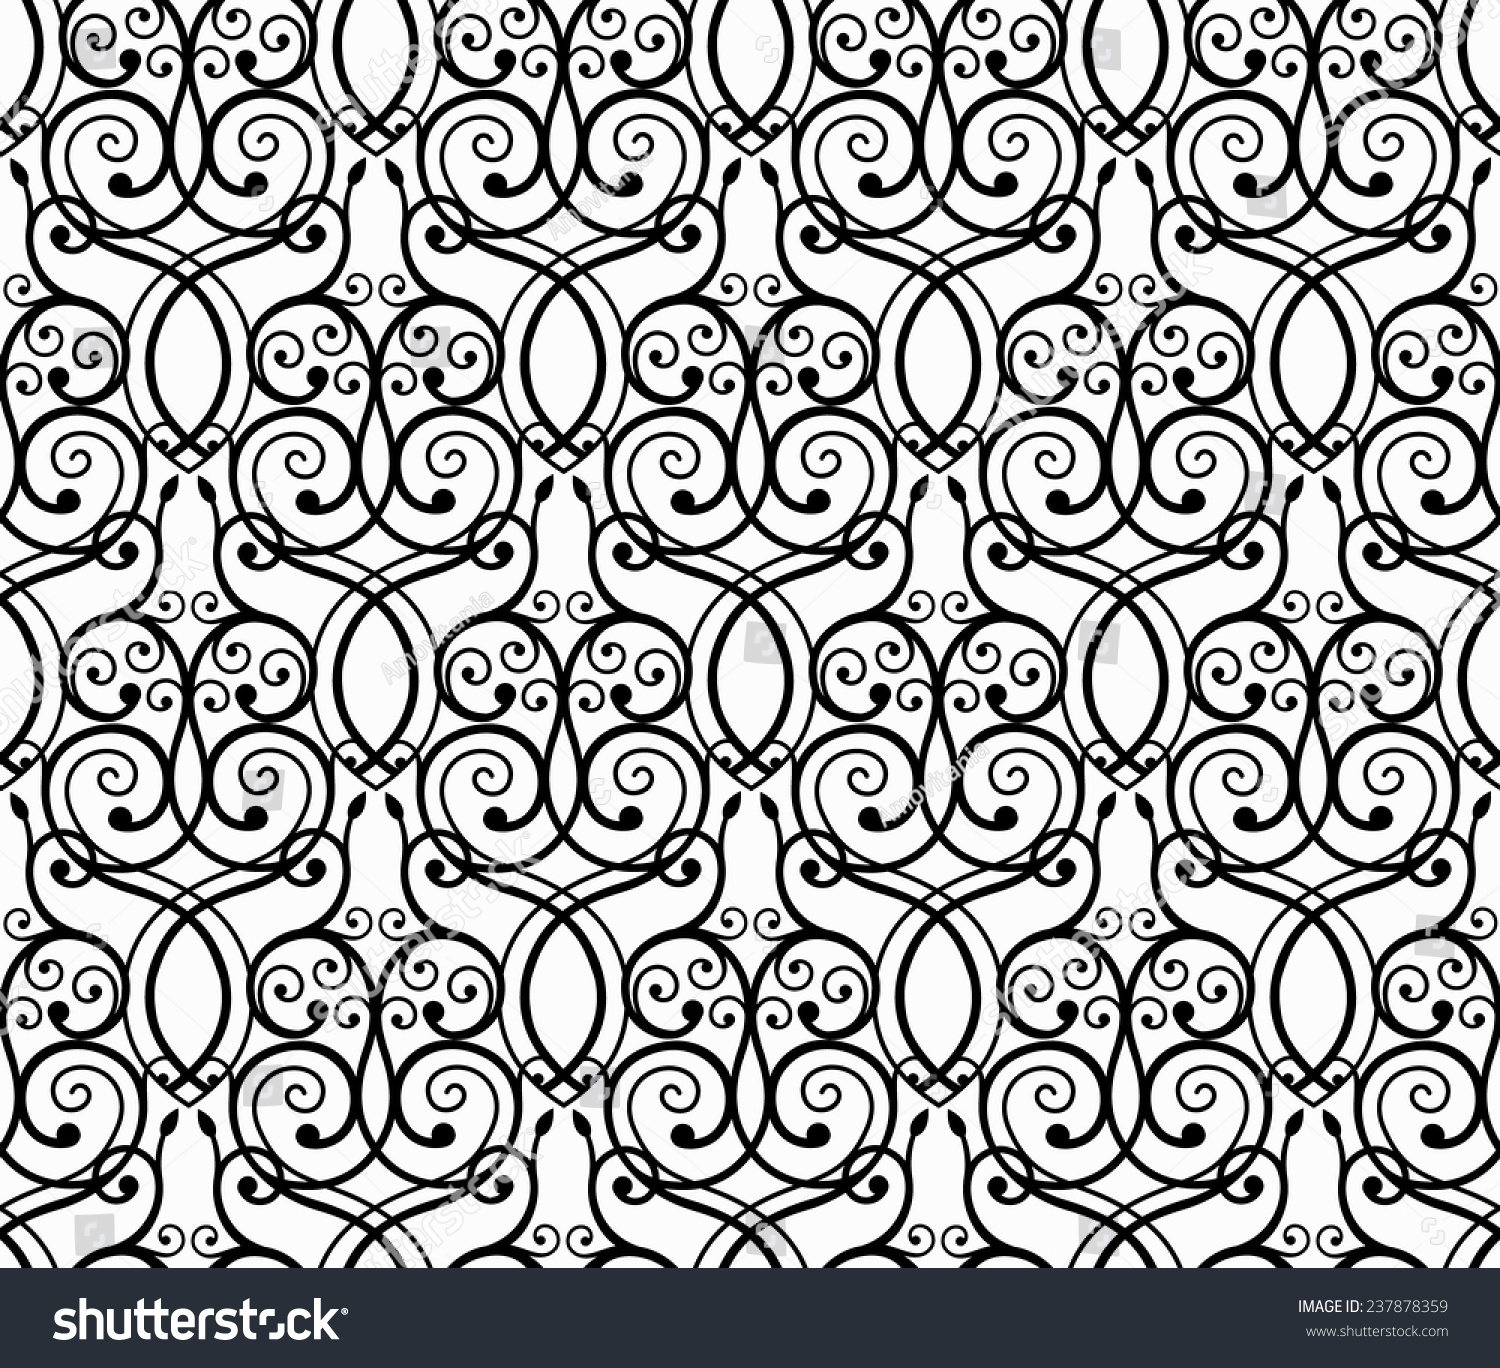 Elegant Black Forged Fretwork Seamless Pattern From Curves With Floral ...